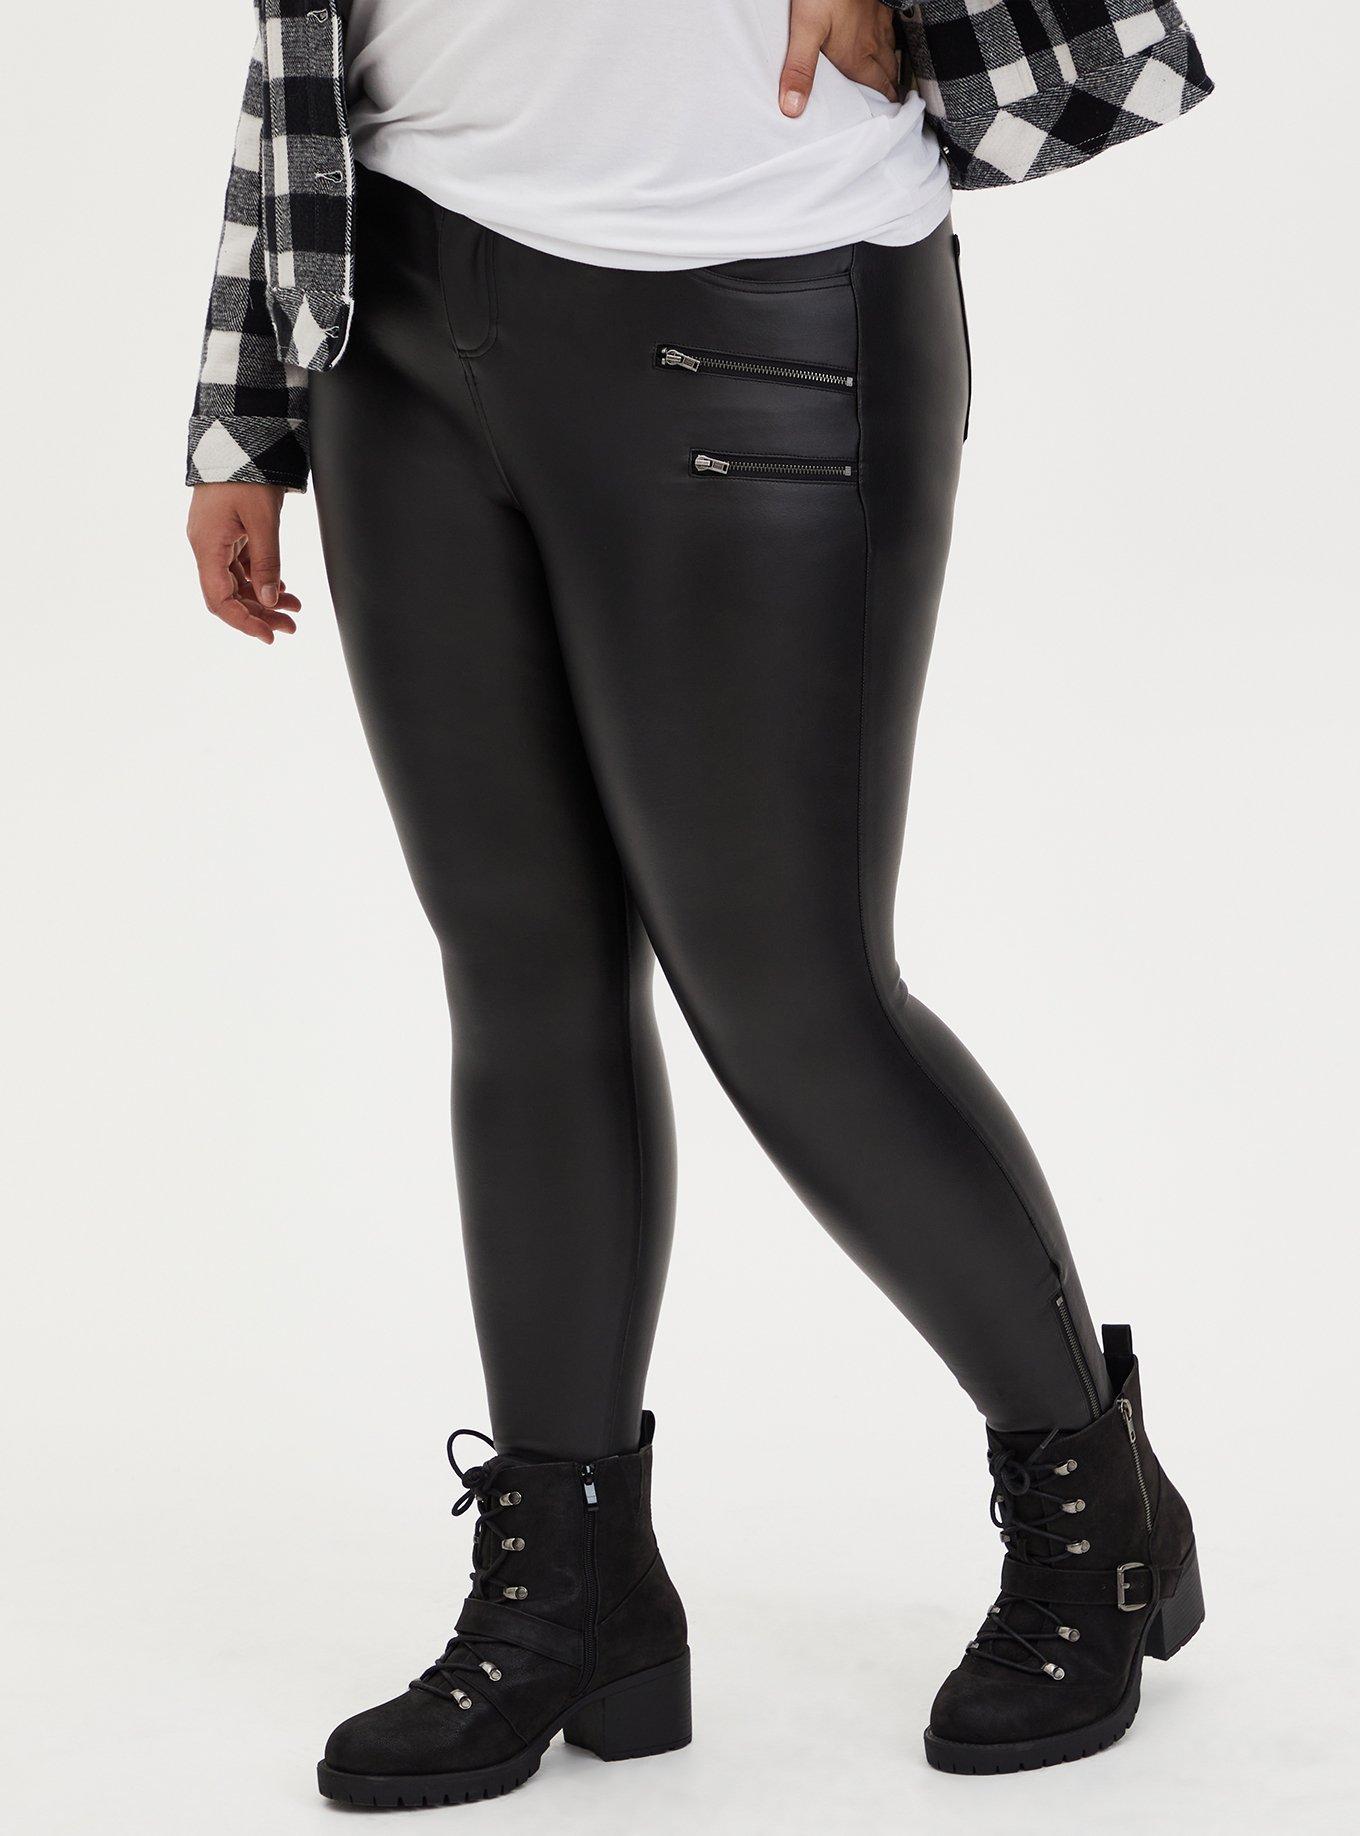 Melody Wear Leather Look Jeggings Mid Waist Black Coated